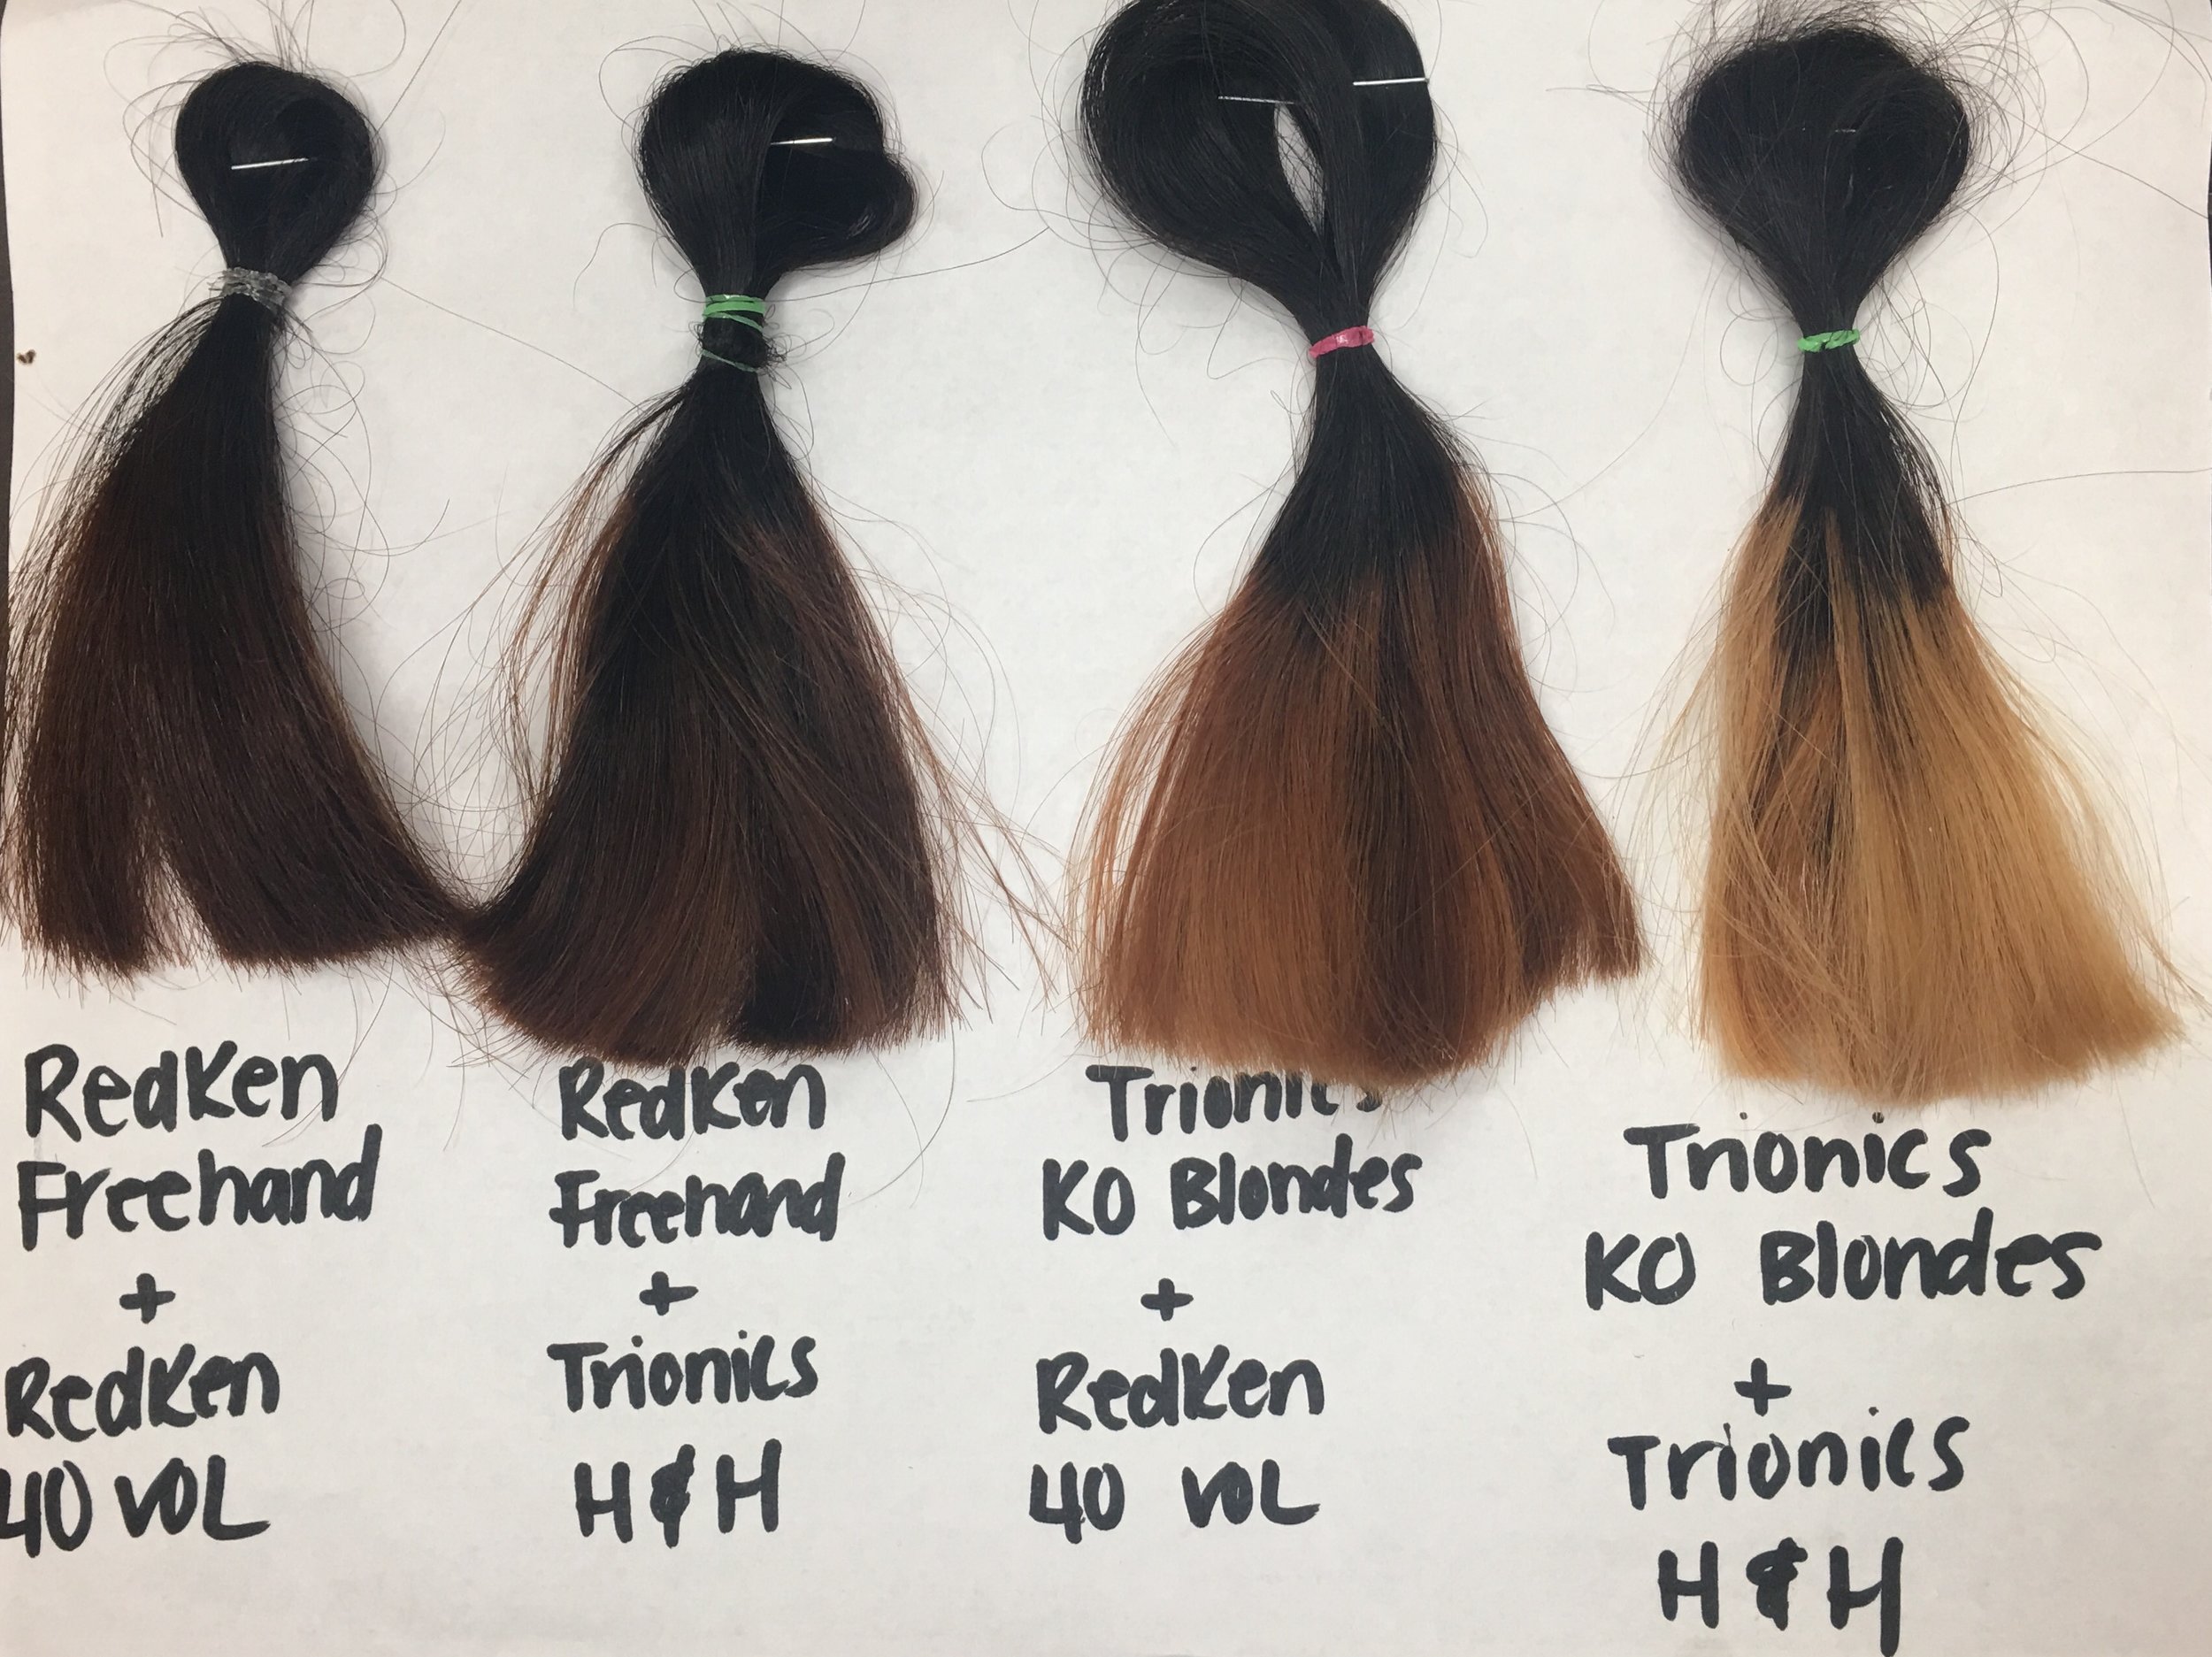 7. The Difference Between 20 Volume and 30 Volume Peroxide for Blonde Hair - wide 7